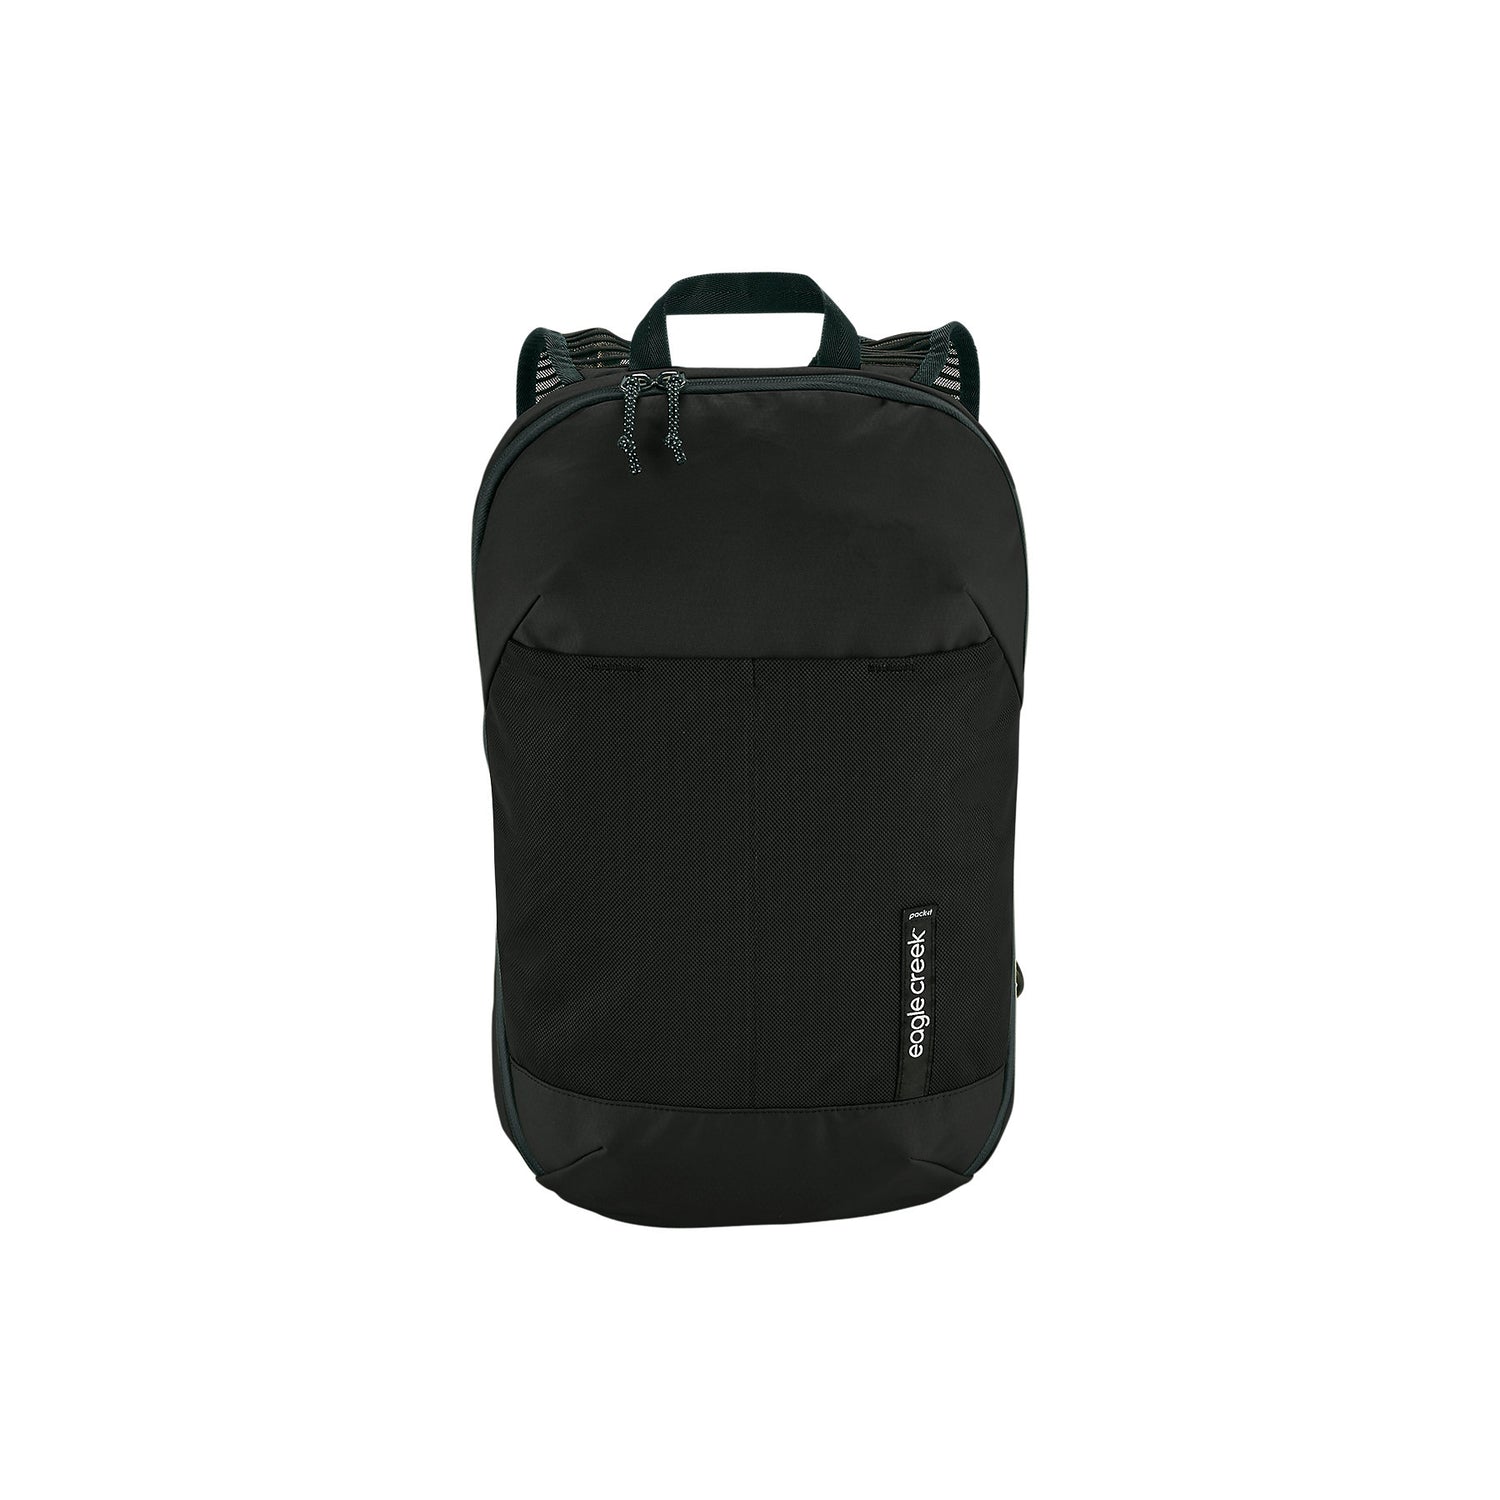 PACK-IT™ Reveal Org Convertible Pack - BLACK